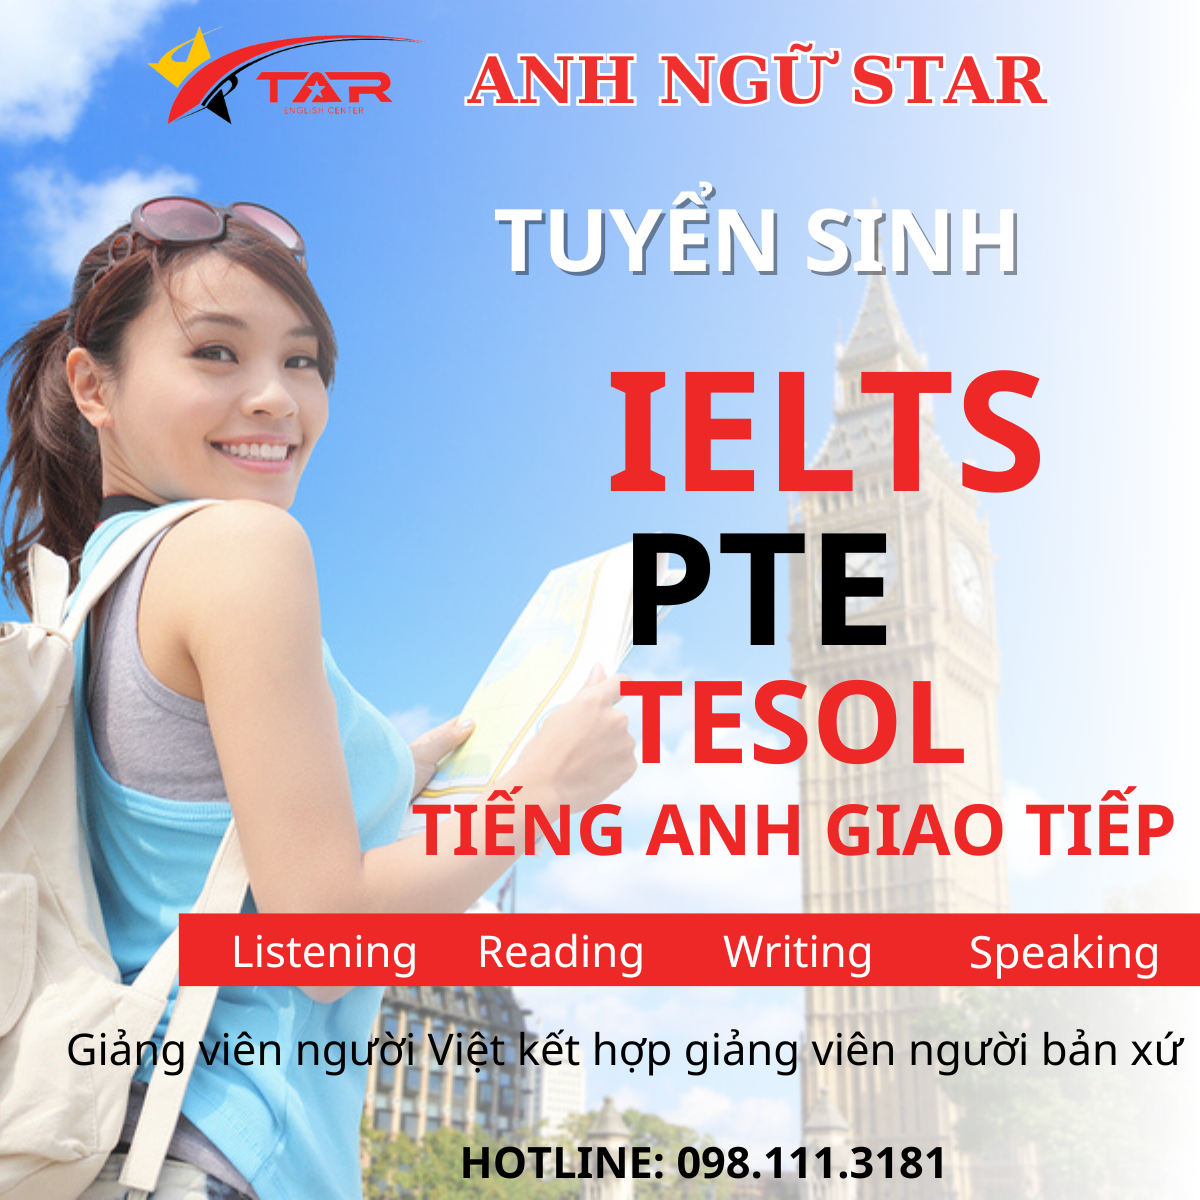 Tuyển sinh IELTS - PTE - TESOL - Tiếng Anh giao tiếp